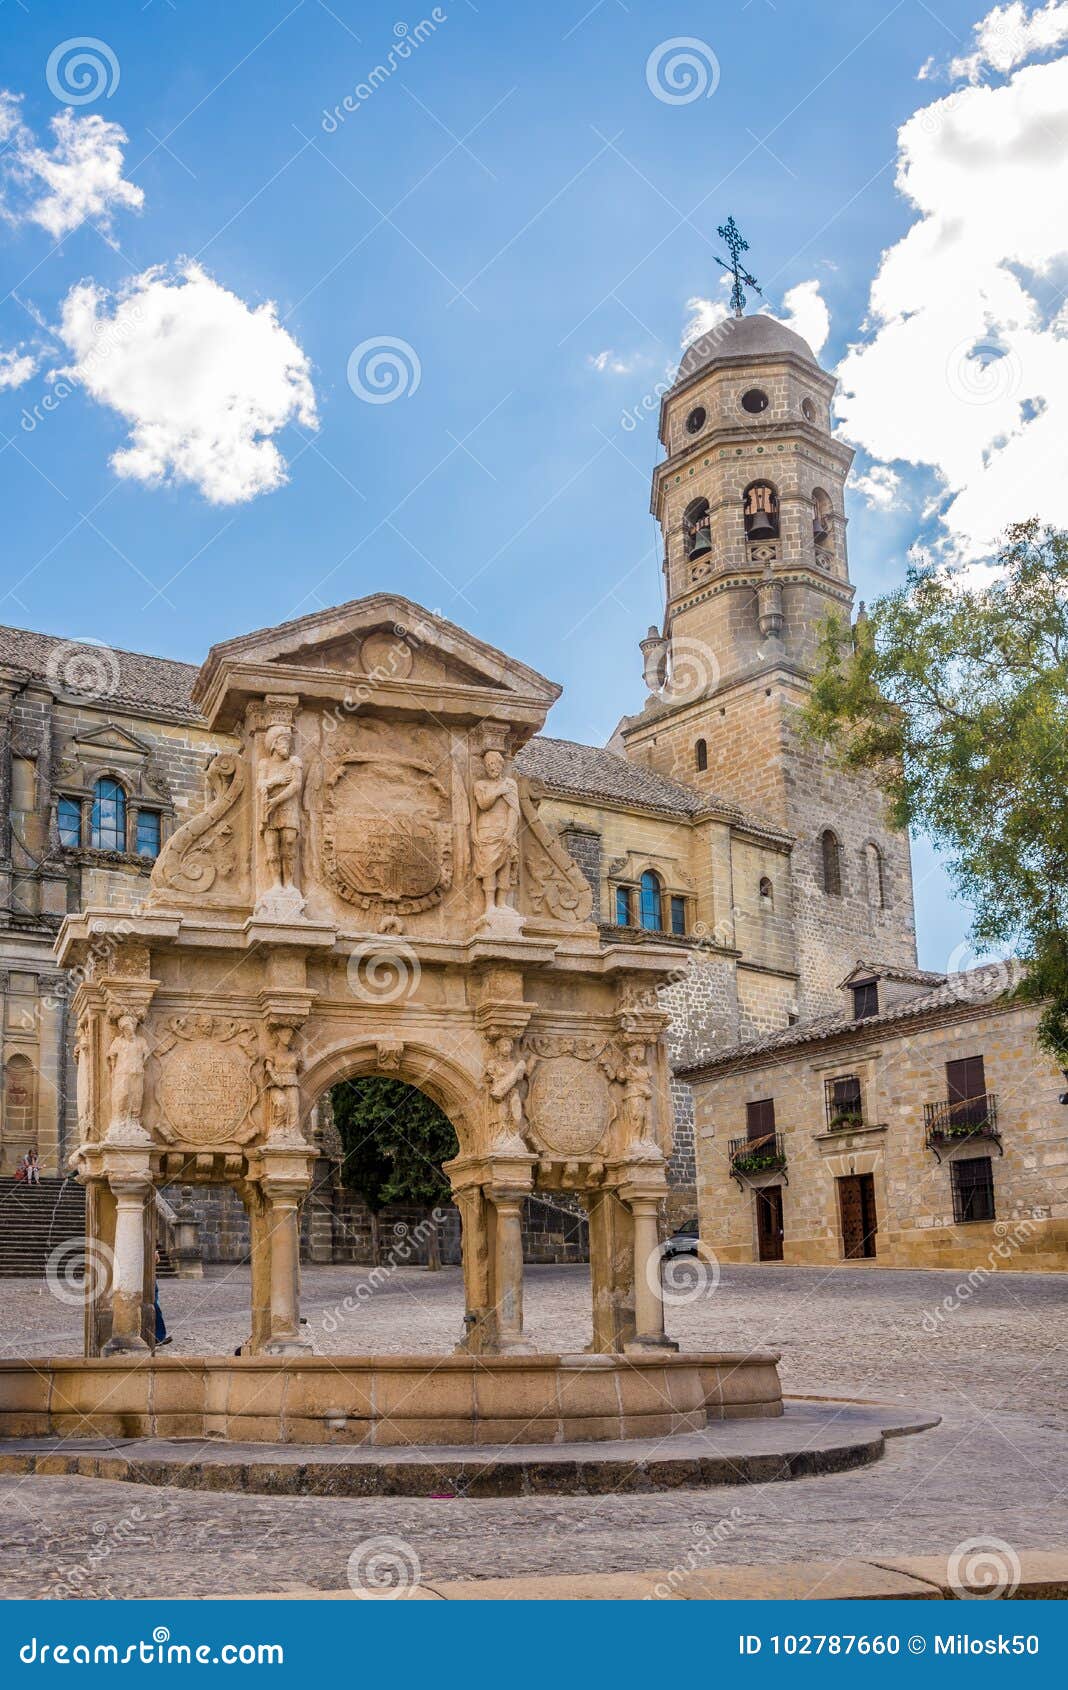 view at the fountain of santa maria with cathedral of baeza - spain